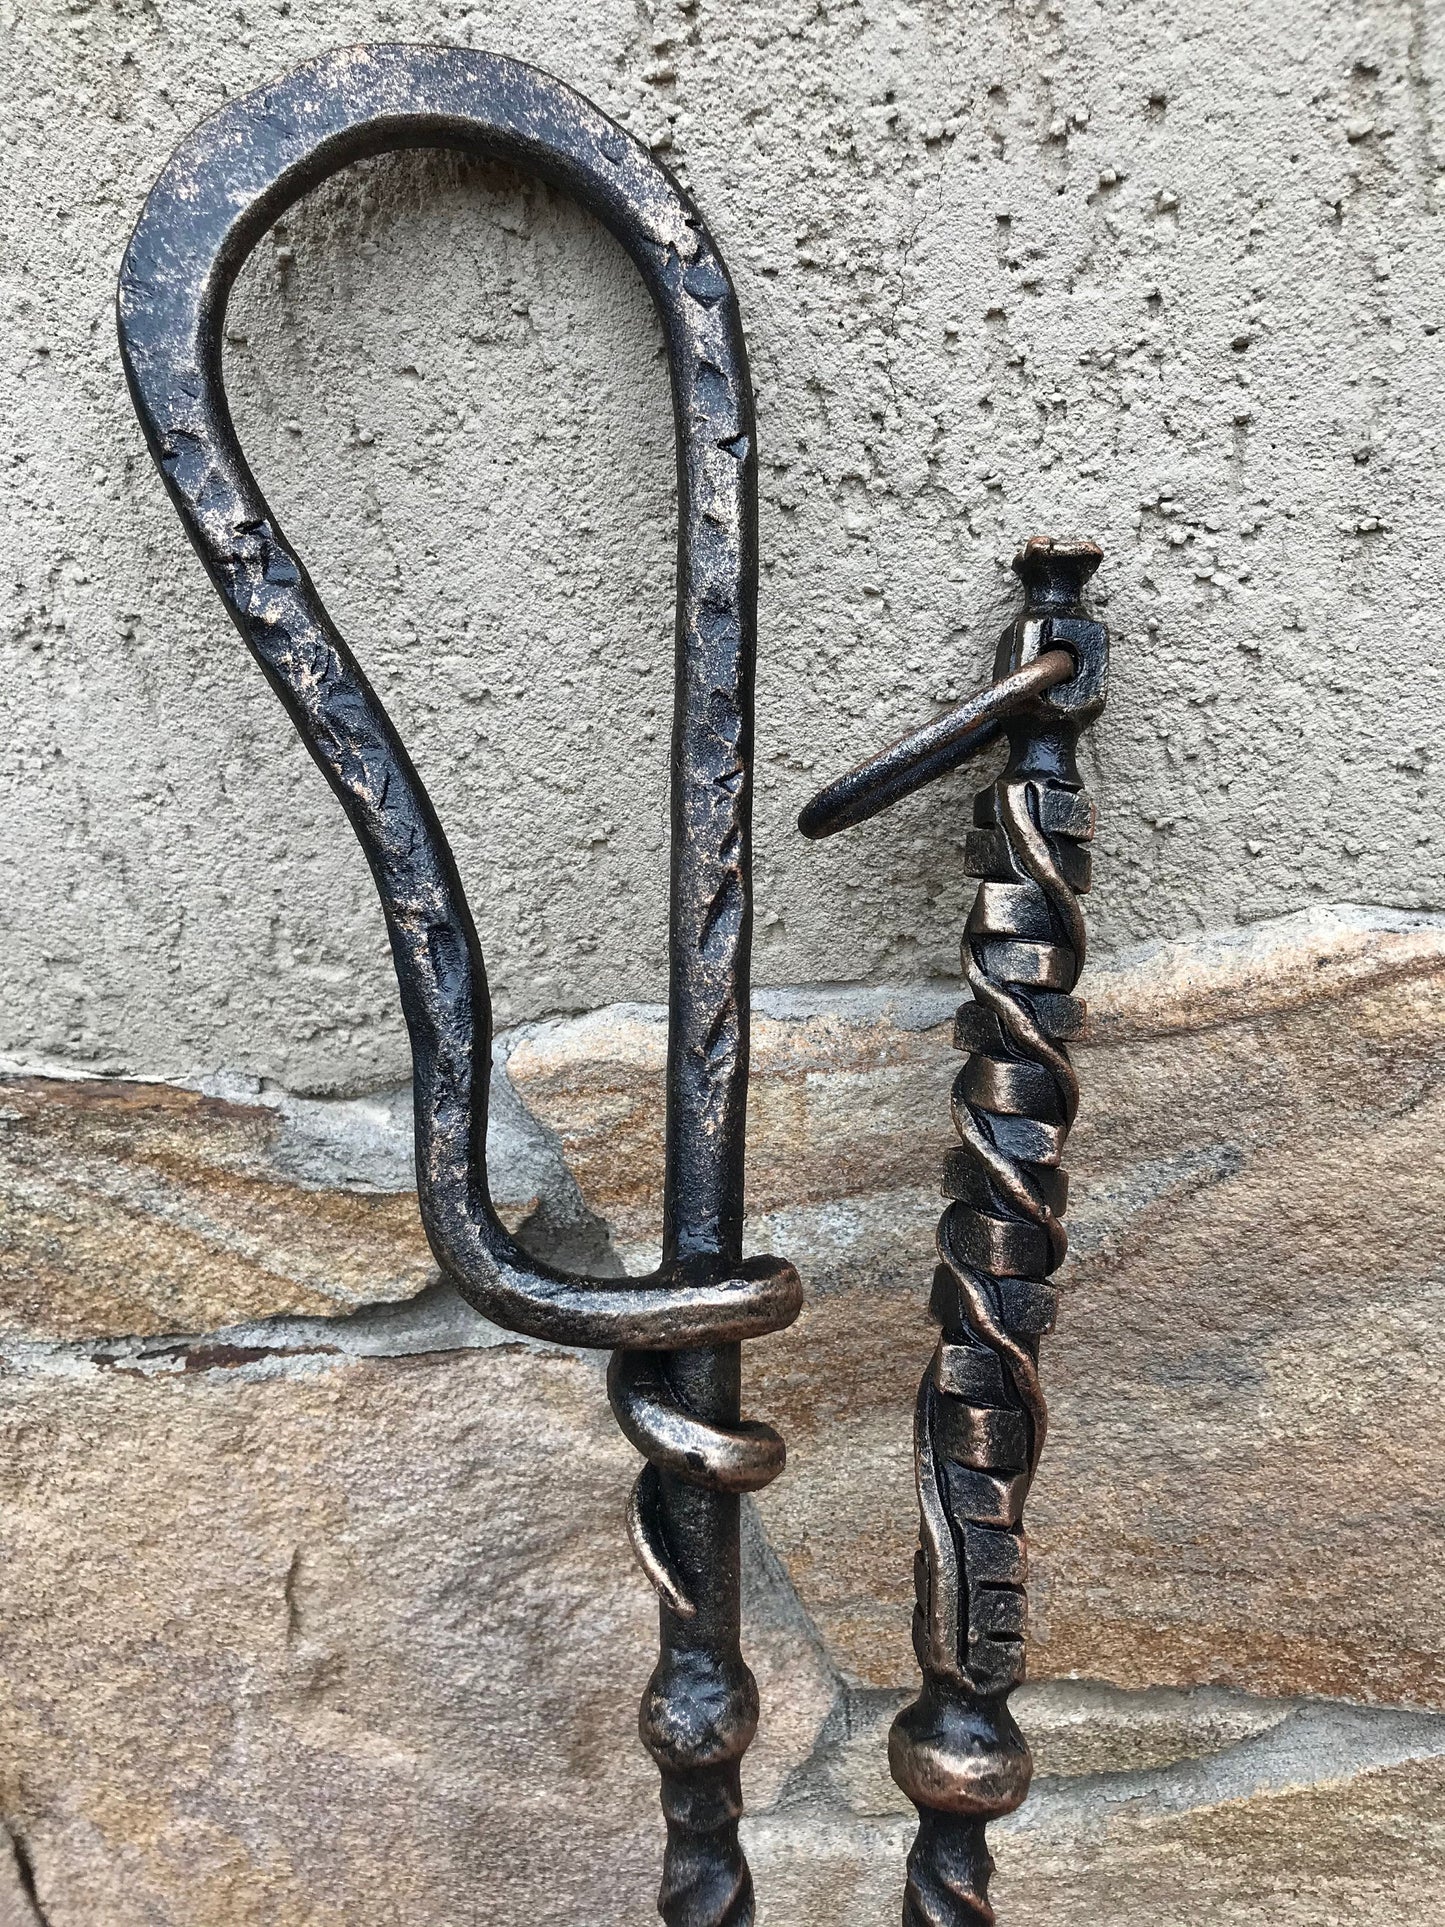 Fireplace tongs, tongs, personalized gift, tools, fireplace tool set, fireplace, fireplace accessories,fire poker,firewood holder,fire tools